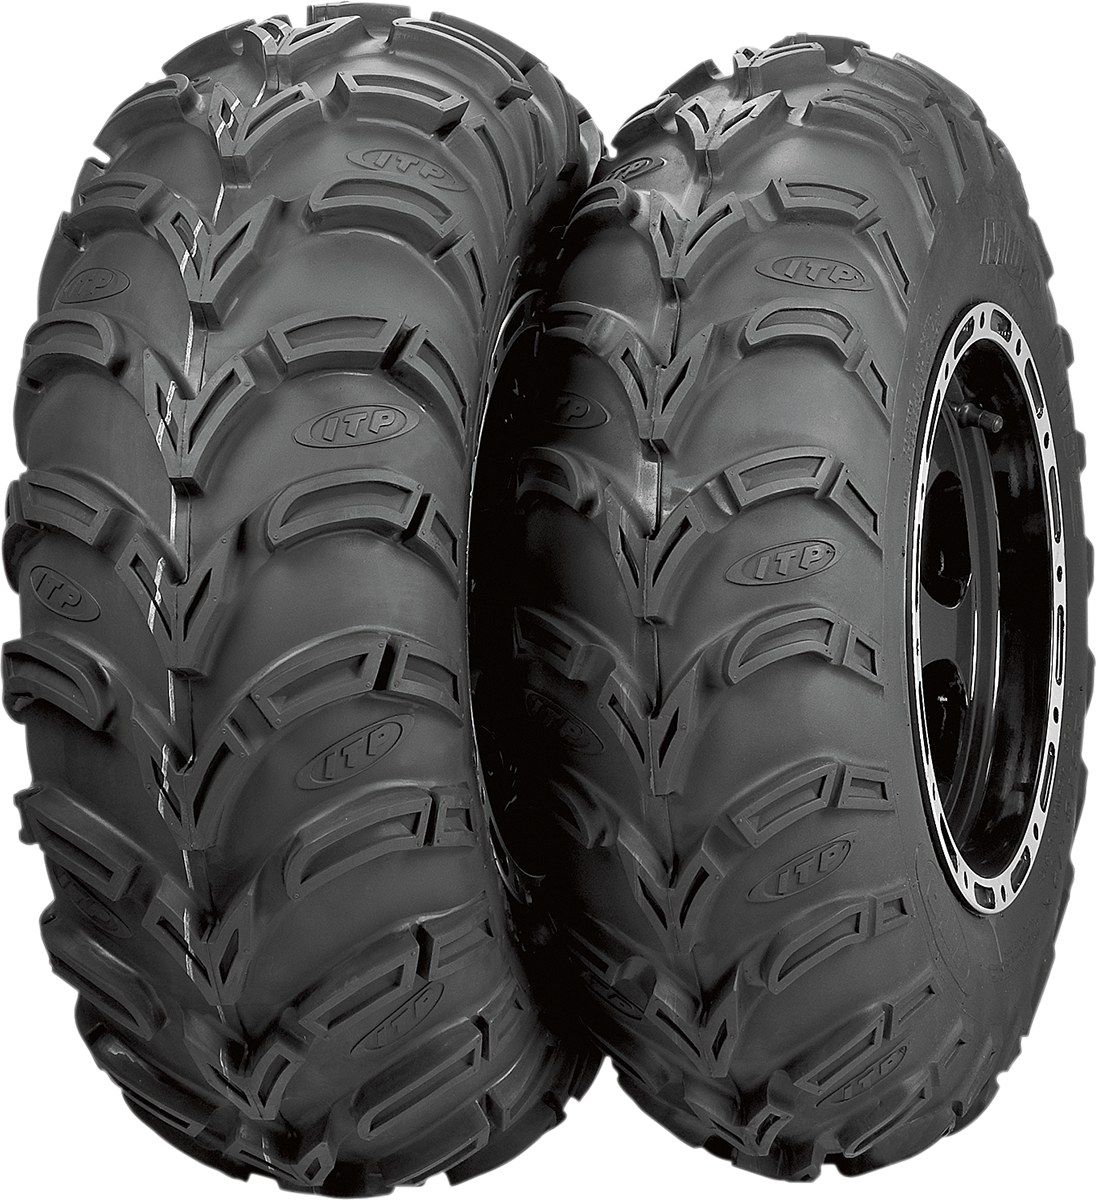 ITP Tire - Mud Lite AT - Front/Rear - 25x10-12 - 6 Ply 56A321